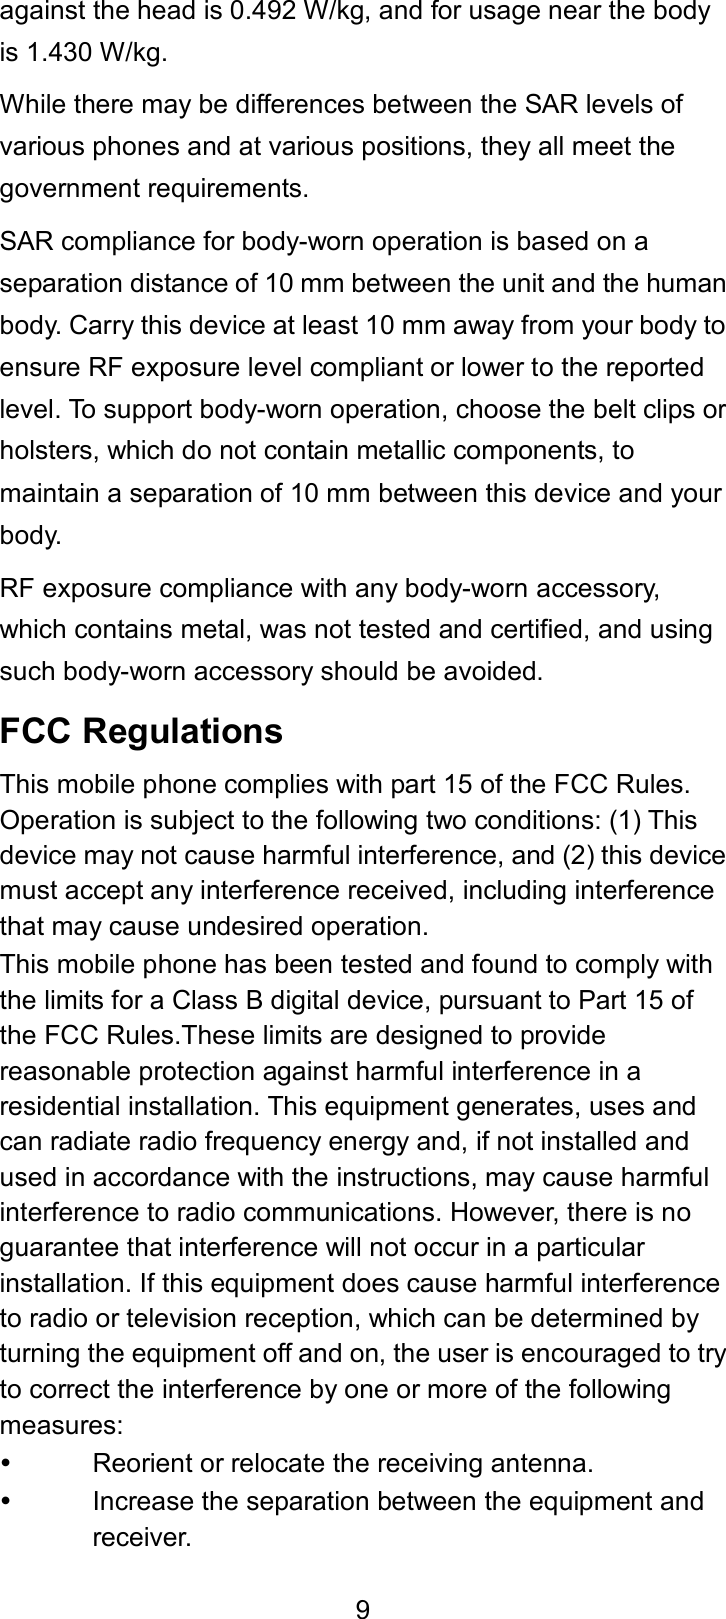  9 against the head is 0.492 W/kg, and for usage near the body is 1.430 W/kg. While there may be differences between the SAR levels of various phones and at various positions, they all meet the government requirements. SAR compliance for body-worn operation is based on a separation distance of 10 mm between the unit and the human body. Carry this device at least 10 mm away from your body to ensure RF exposure level compliant or lower to the reported level. To support body-worn operation, choose the belt clips or holsters, which do not contain metallic components, to maintain a separation of 10 mm between this device and your body. RF exposure compliance with any body-worn accessory, which contains metal, was not tested and certified, and using such body-worn accessory should be avoided. FCC Regulations This mobile phone complies with part 15 of the FCC Rules. Operation is subject to the following two conditions: (1) This device may not cause harmful interference, and (2) this device must accept any interference received, including interference that may cause undesired operation.   This mobile phone has been tested and found to comply with the limits for a Class B digital device, pursuant to Part 15 of the FCC Rules.These limits are designed to provide reasonable protection against harmful interference in a residential installation. This equipment generates, uses and can radiate radio frequency energy and, if not installed and used in accordance with the instructions, may cause harmful interference to radio communications. However, there is no guarantee that interference will not occur in a particular installation. If this equipment does cause harmful interference to radio or television reception, which can be determined by turning the equipment off and on, the user is encouraged to try to correct the interference by one or more of the following measures:   Reorient or relocate the receiving antenna.   Increase the separation between the equipment and receiver. 